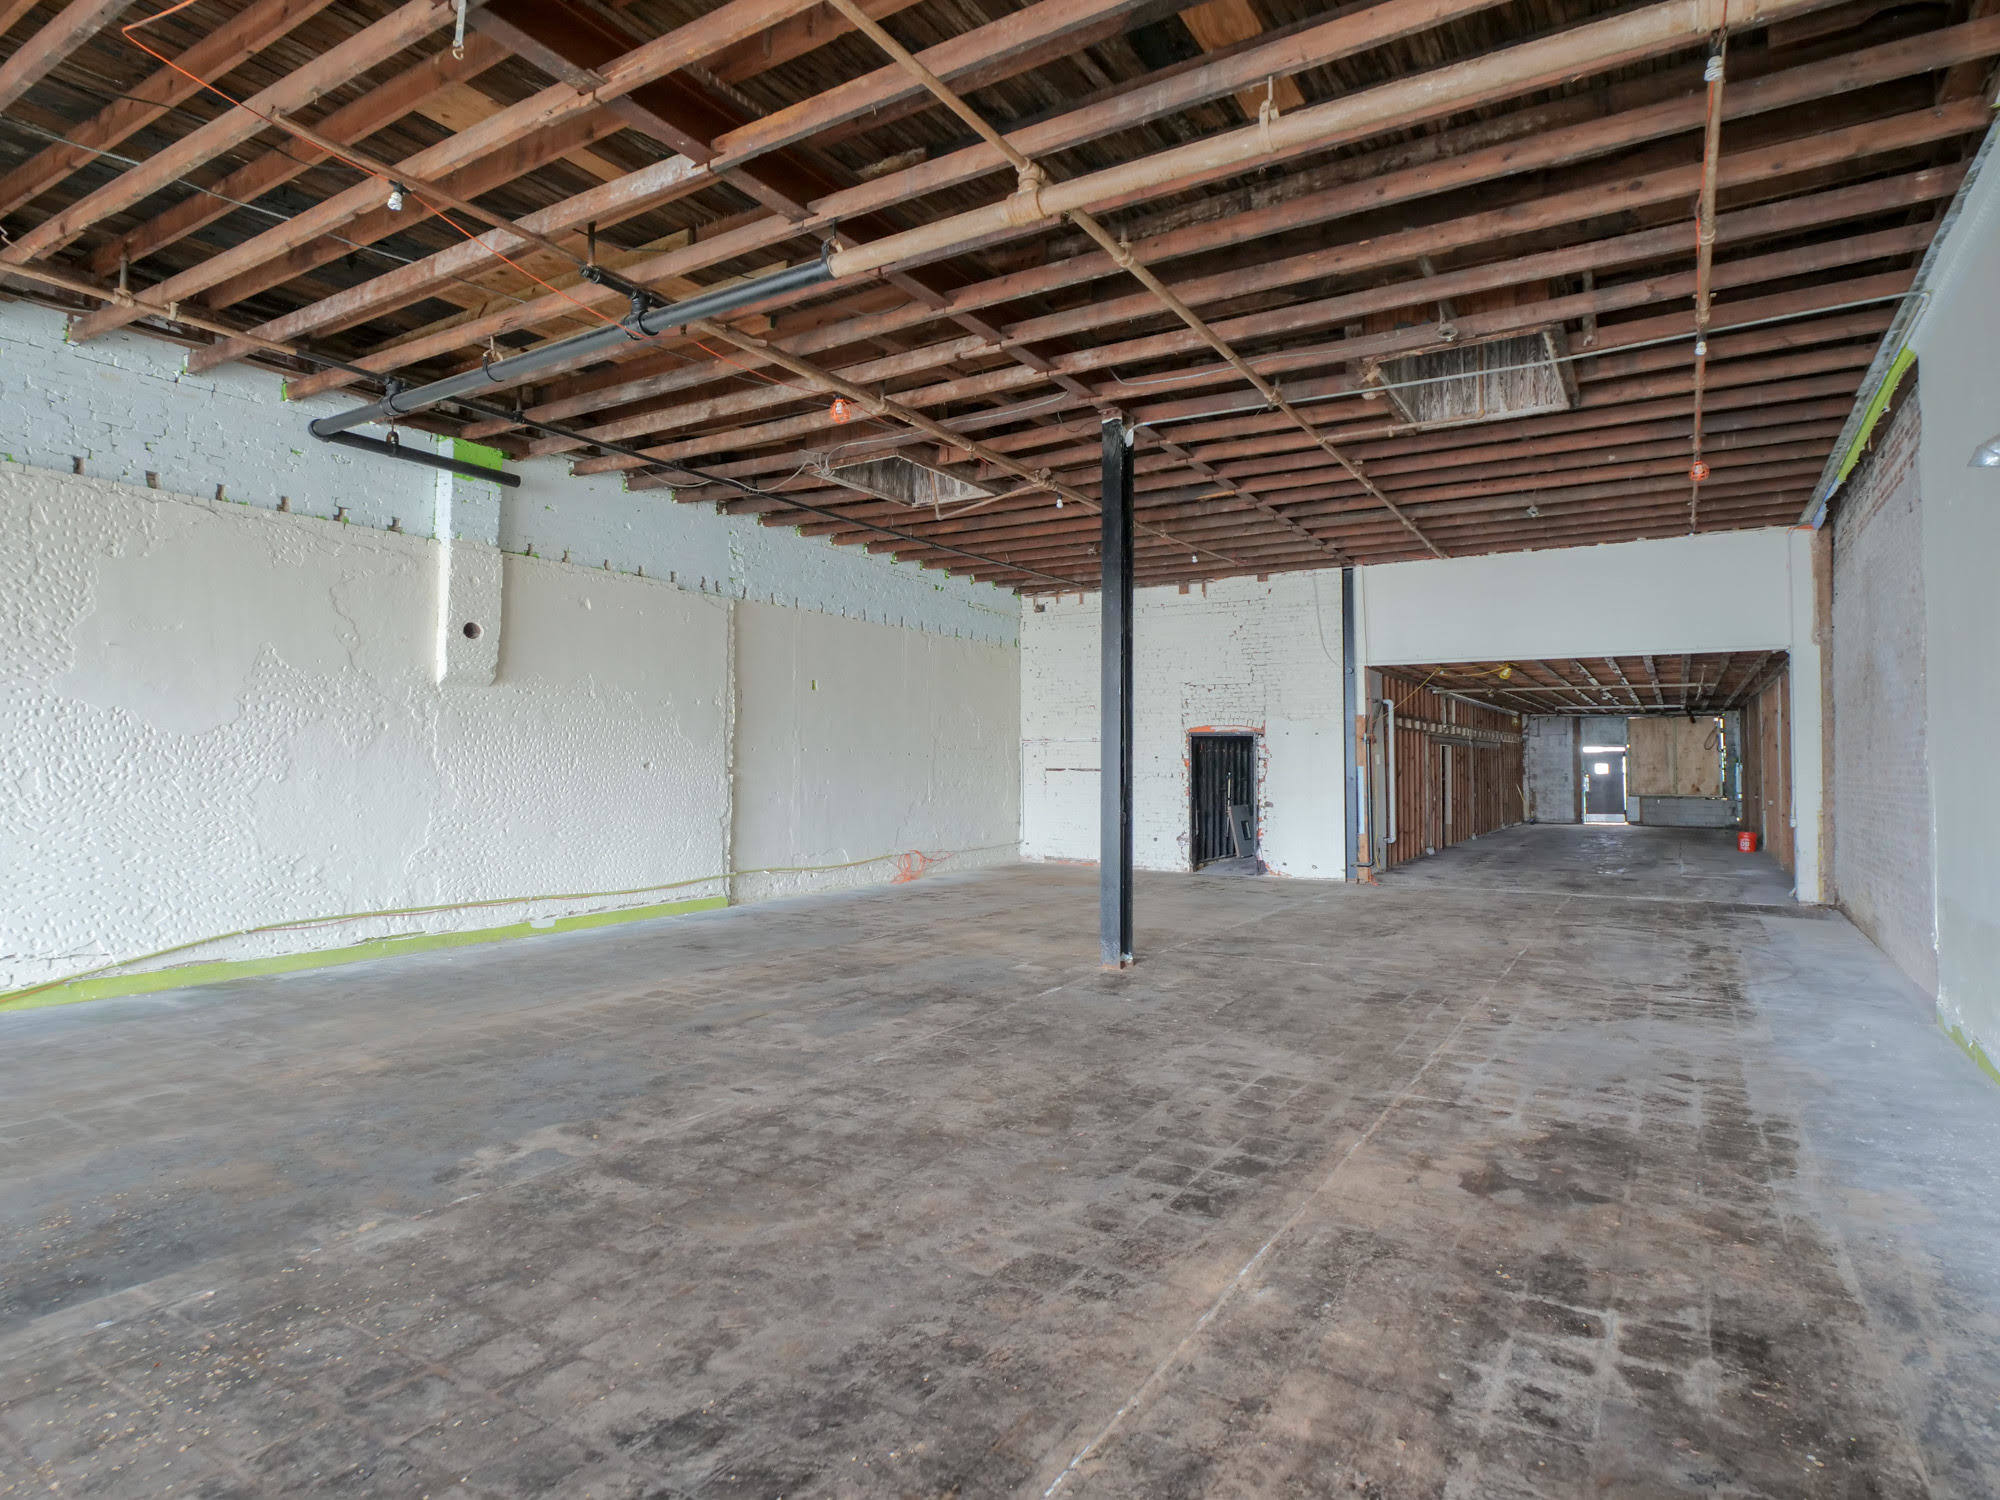 Bad Axe Throwing plans a a full build-out of the 4,200-square-foot interior.